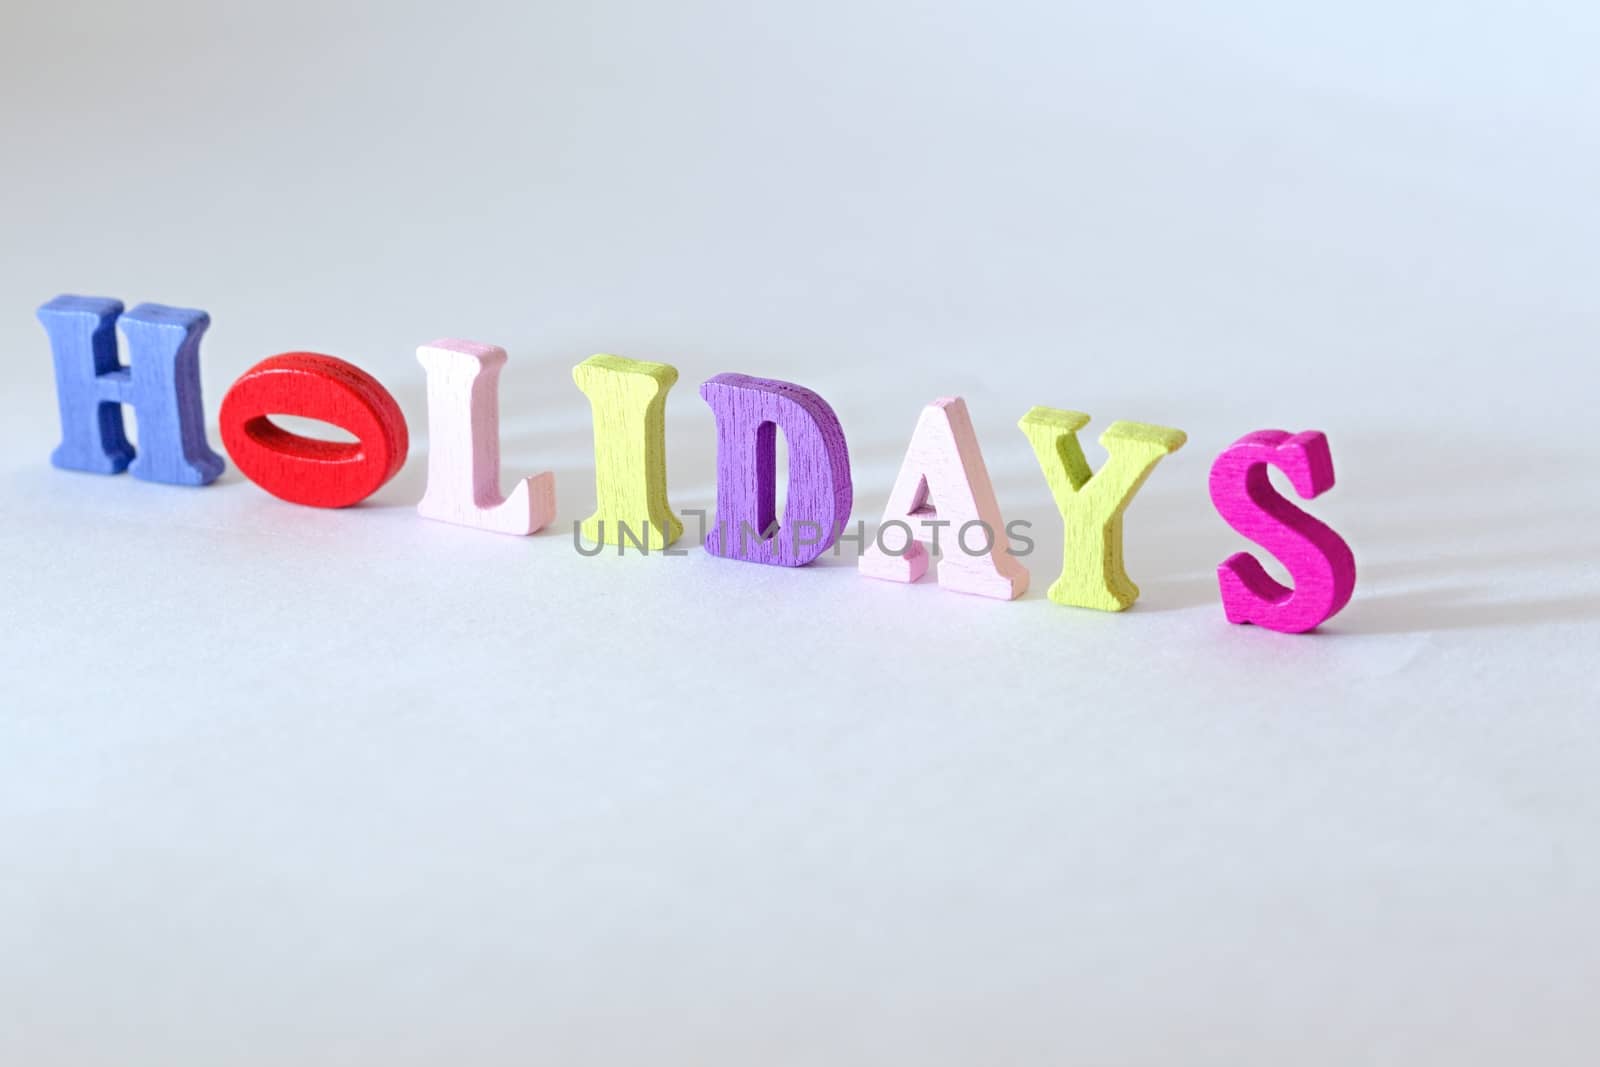 Holidays sign by Dermot68